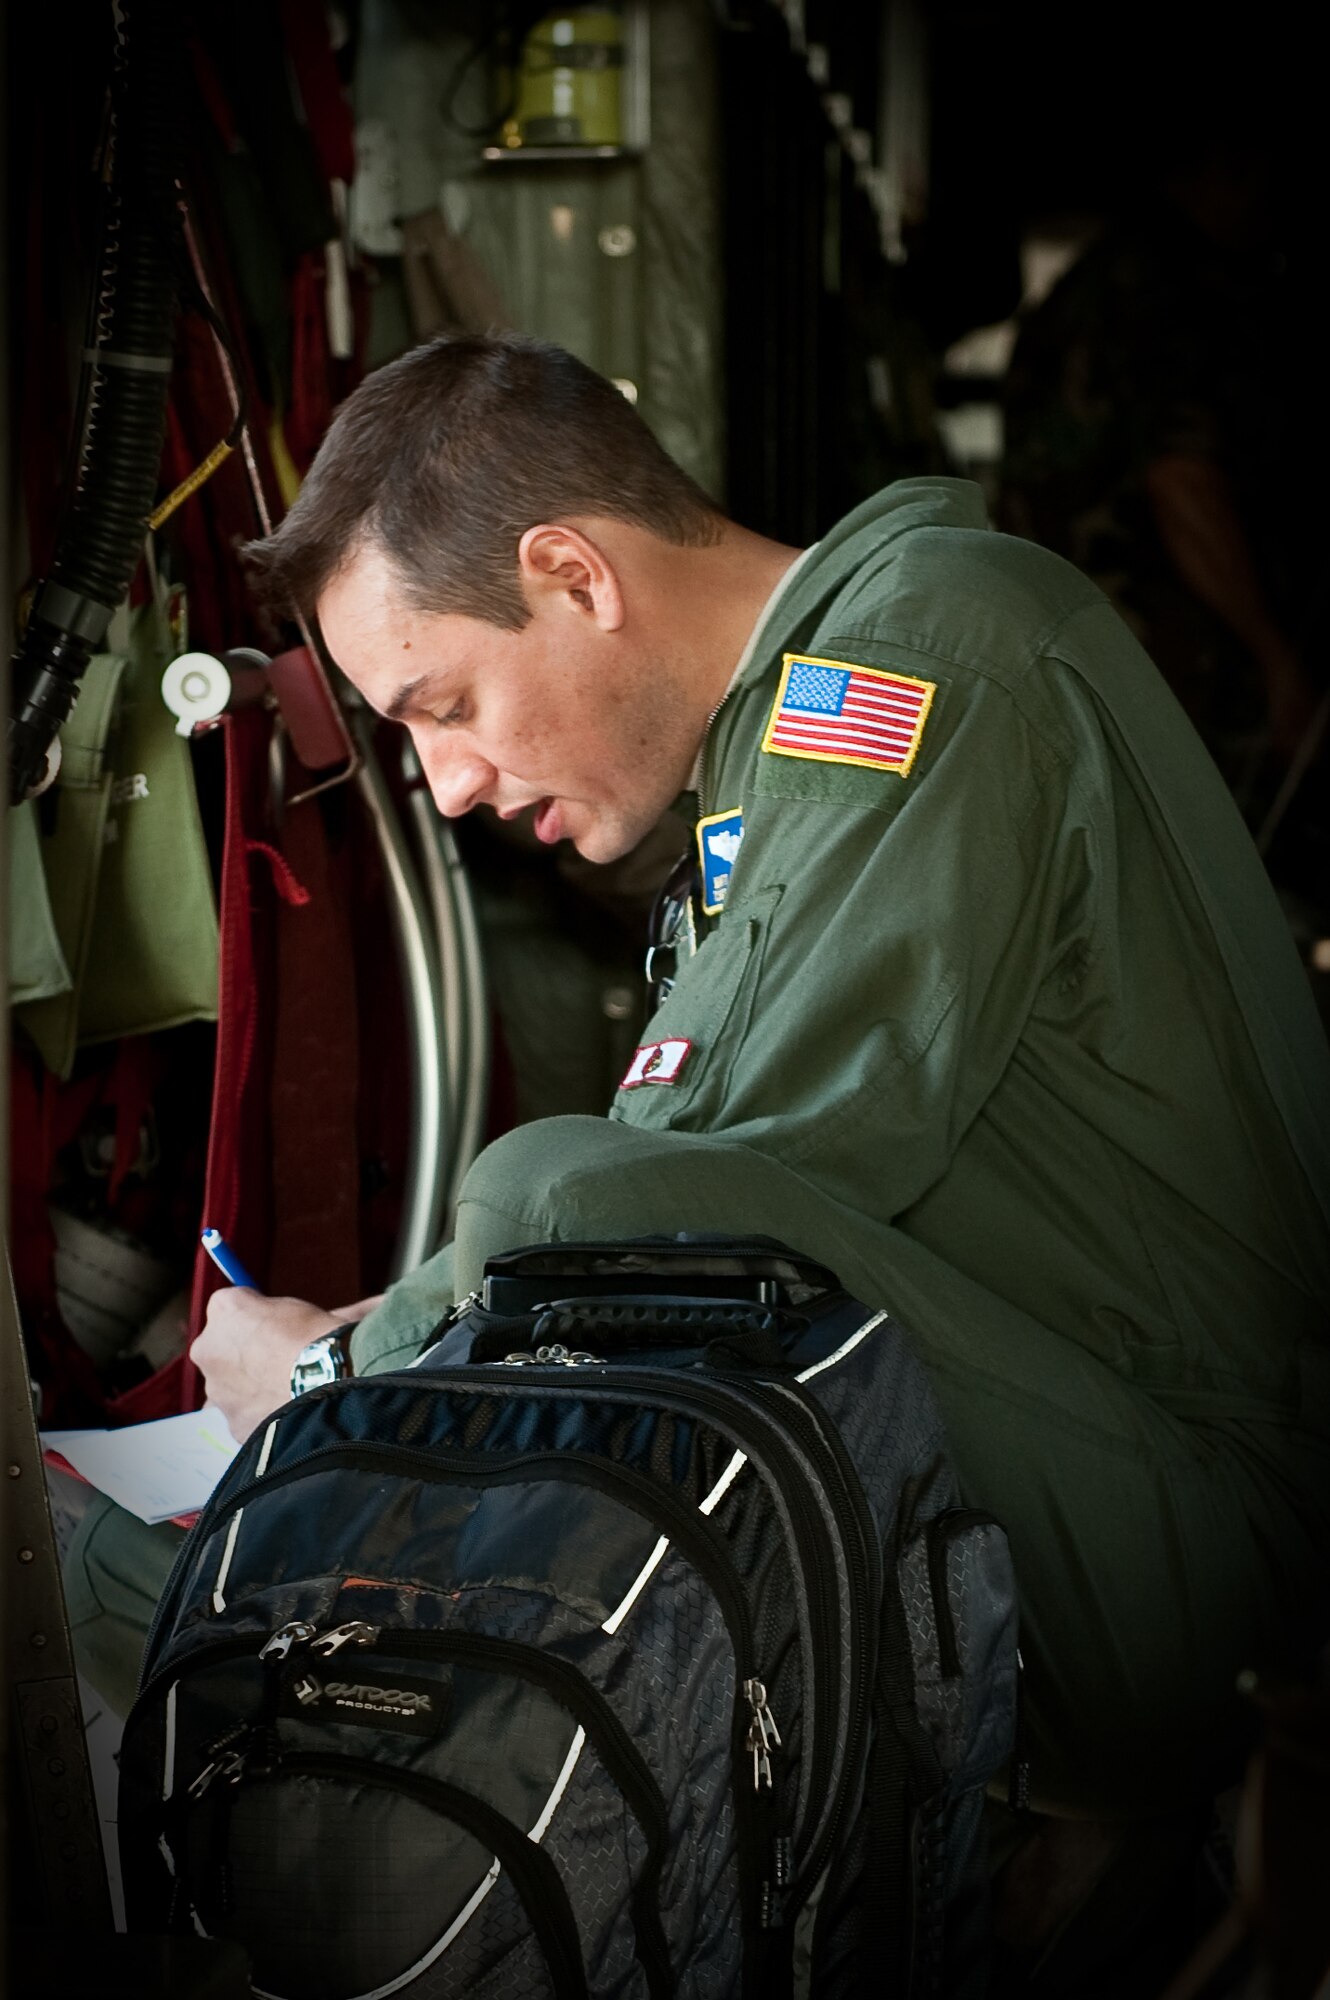 Tech. Sgt. Matt Atkinson, a loadmaster in the 123rd Airlift Wing, checks C-130 passenger manifests at the Kentucky Air National Guard Base in Louisville, Ky., on Sept. 12, prior to a flight to Puerto Rico. About 100 Kentucky Air Guardsmen will be supporting U.S. Southern Command airlift operations from San Juan through Oct. 10 as part of Operation Coronet Oak. (U.S. Air Force photo/Maj. Dale Greer)